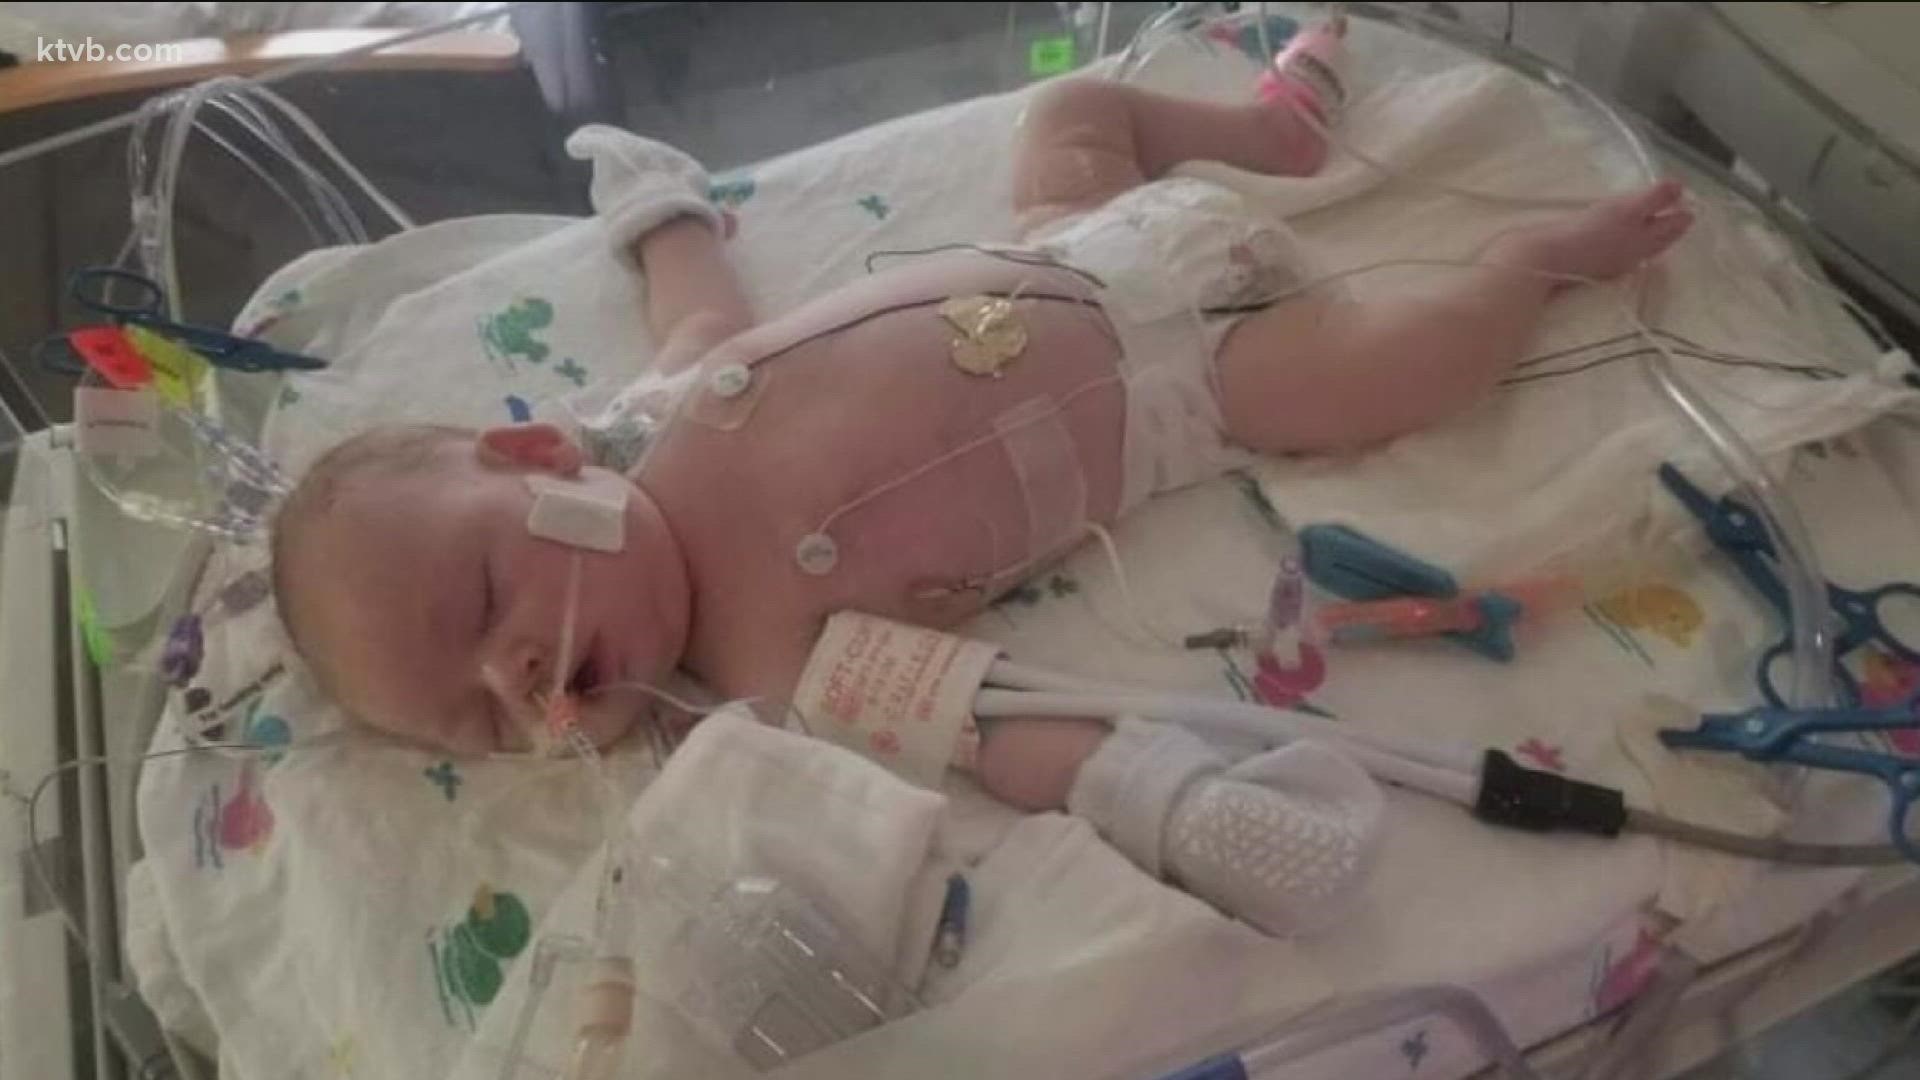 When things took a turn for the worse this week, seven-week-old Ostara Clure was rushed from Boise to Salt Lake City to receive ECMO treatment.